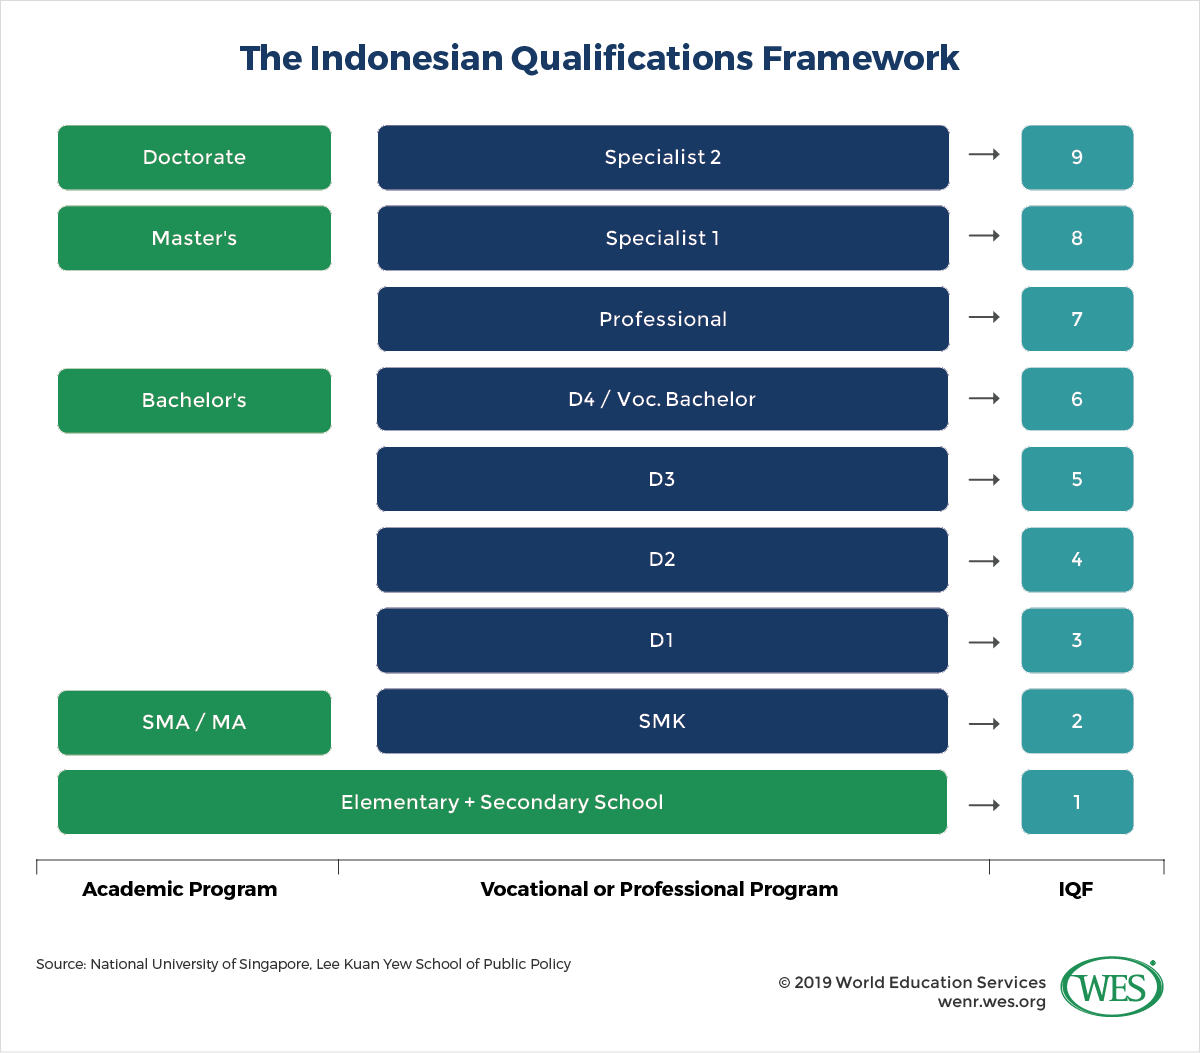 Education in Indonesia Image 8: Image of the Indonesian Qualifications Framework